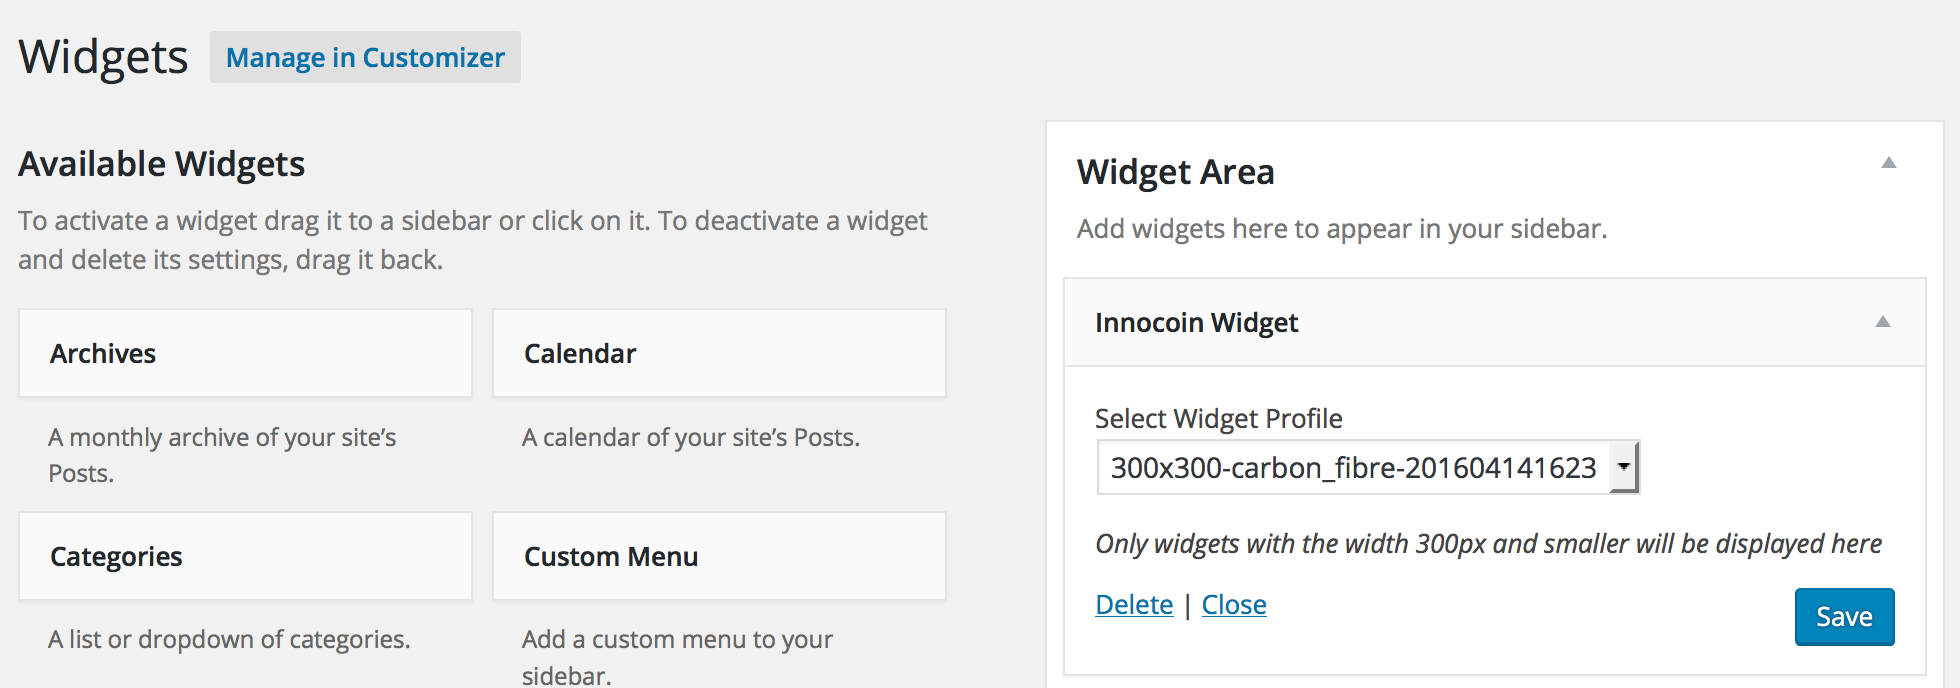 In appearance -> widgets you can find the Innocoin widget, which can be used to place the widget in the sidebar